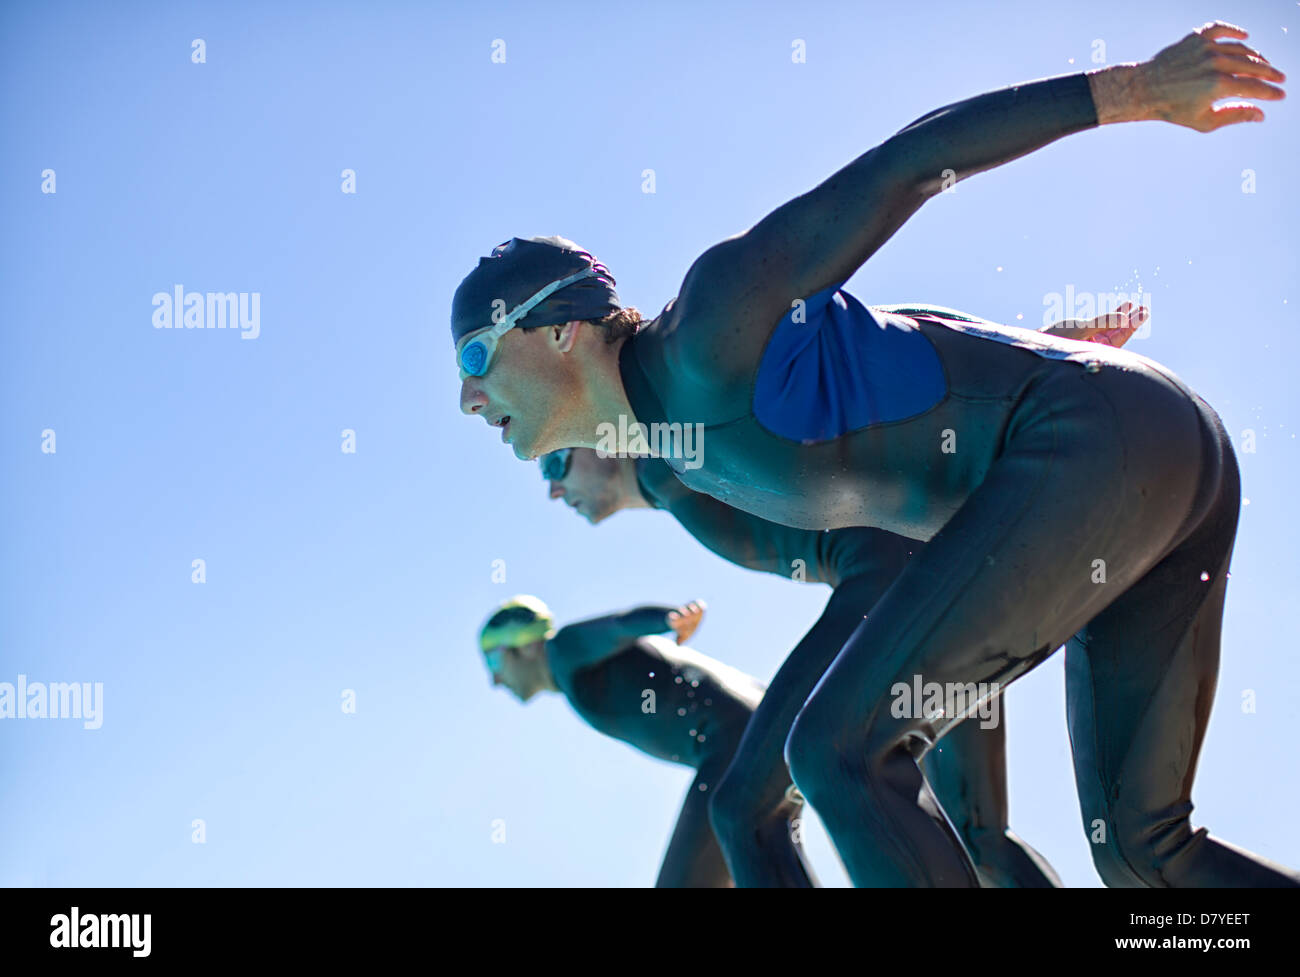 Triathletes diving into water outdoors Stock Photo